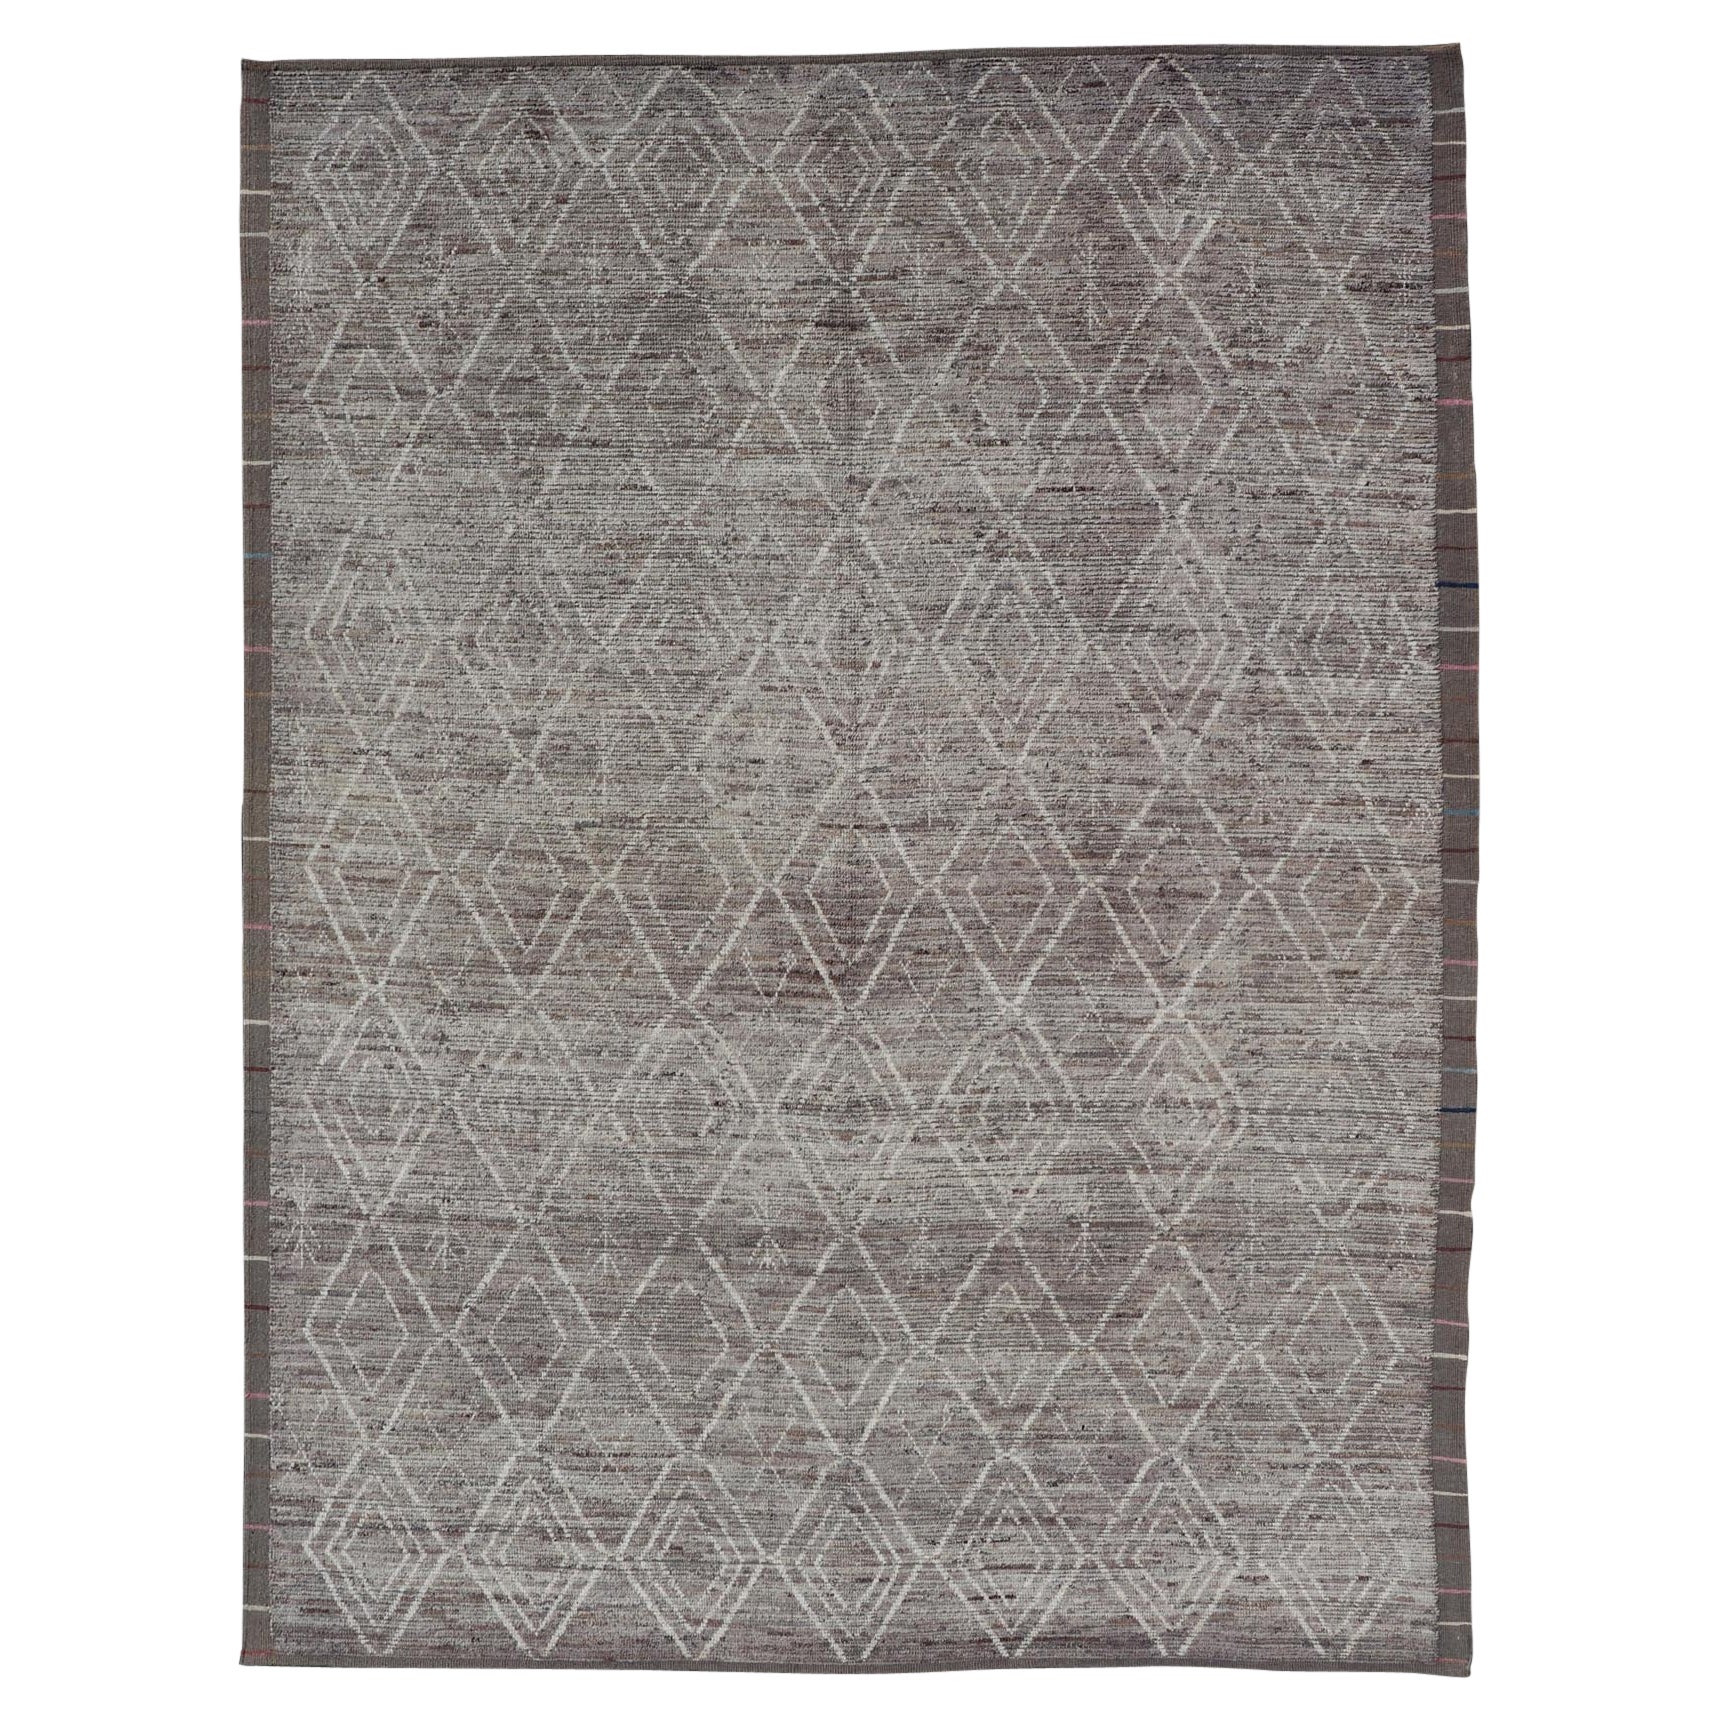 Modern Causal Contemporary Rug in Moroccan Design in Variegated Gray and Cream